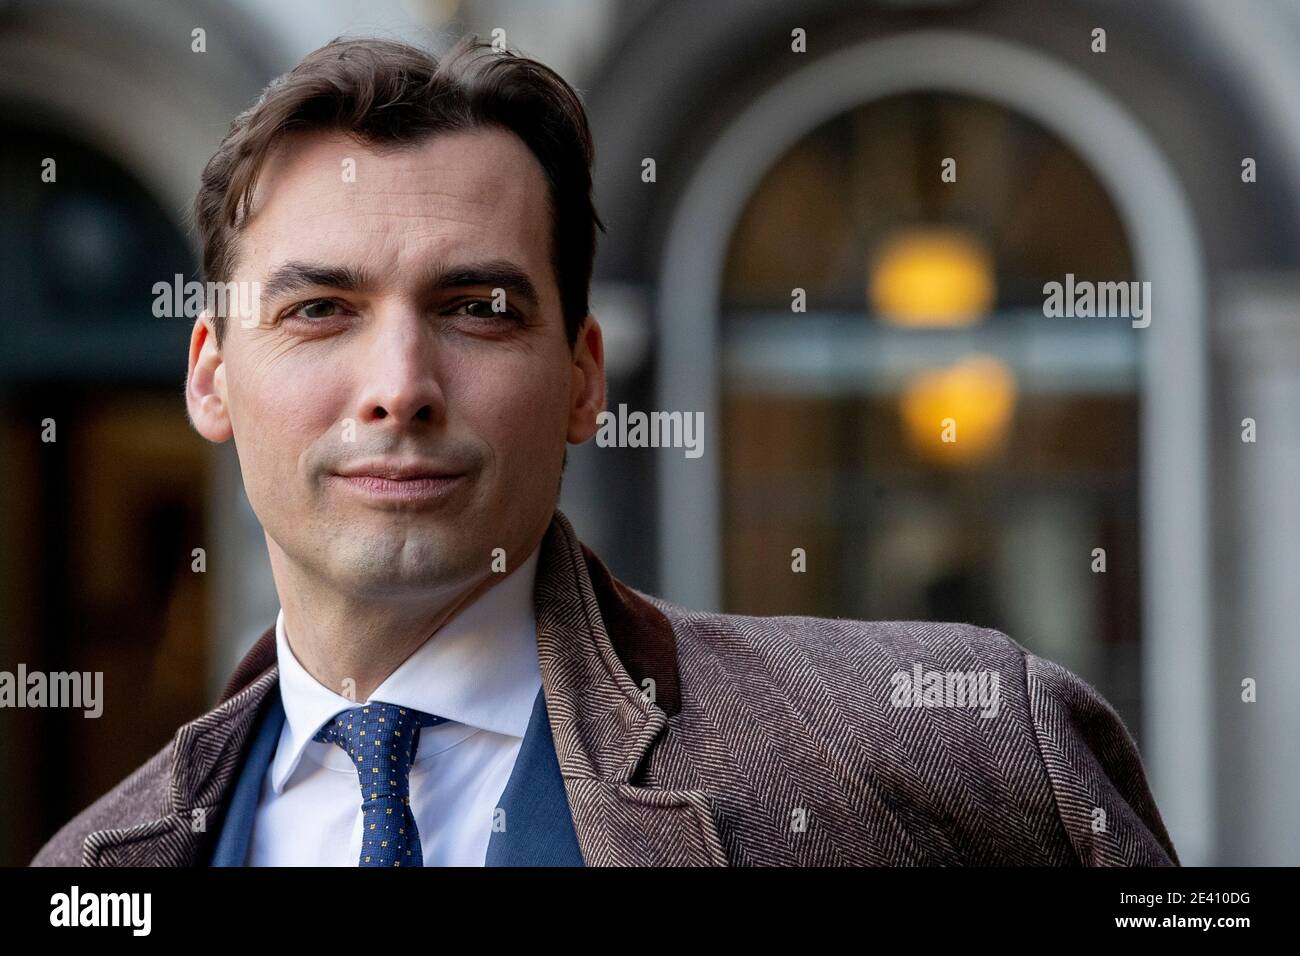 THE HAGUE, NETHERLANDS - JANUARY 21:  Portrait of Thierry Baudet, political leader of Forum voor Democratie (FVD) on January 21, 2021 in The Hague, NE Stock Photo